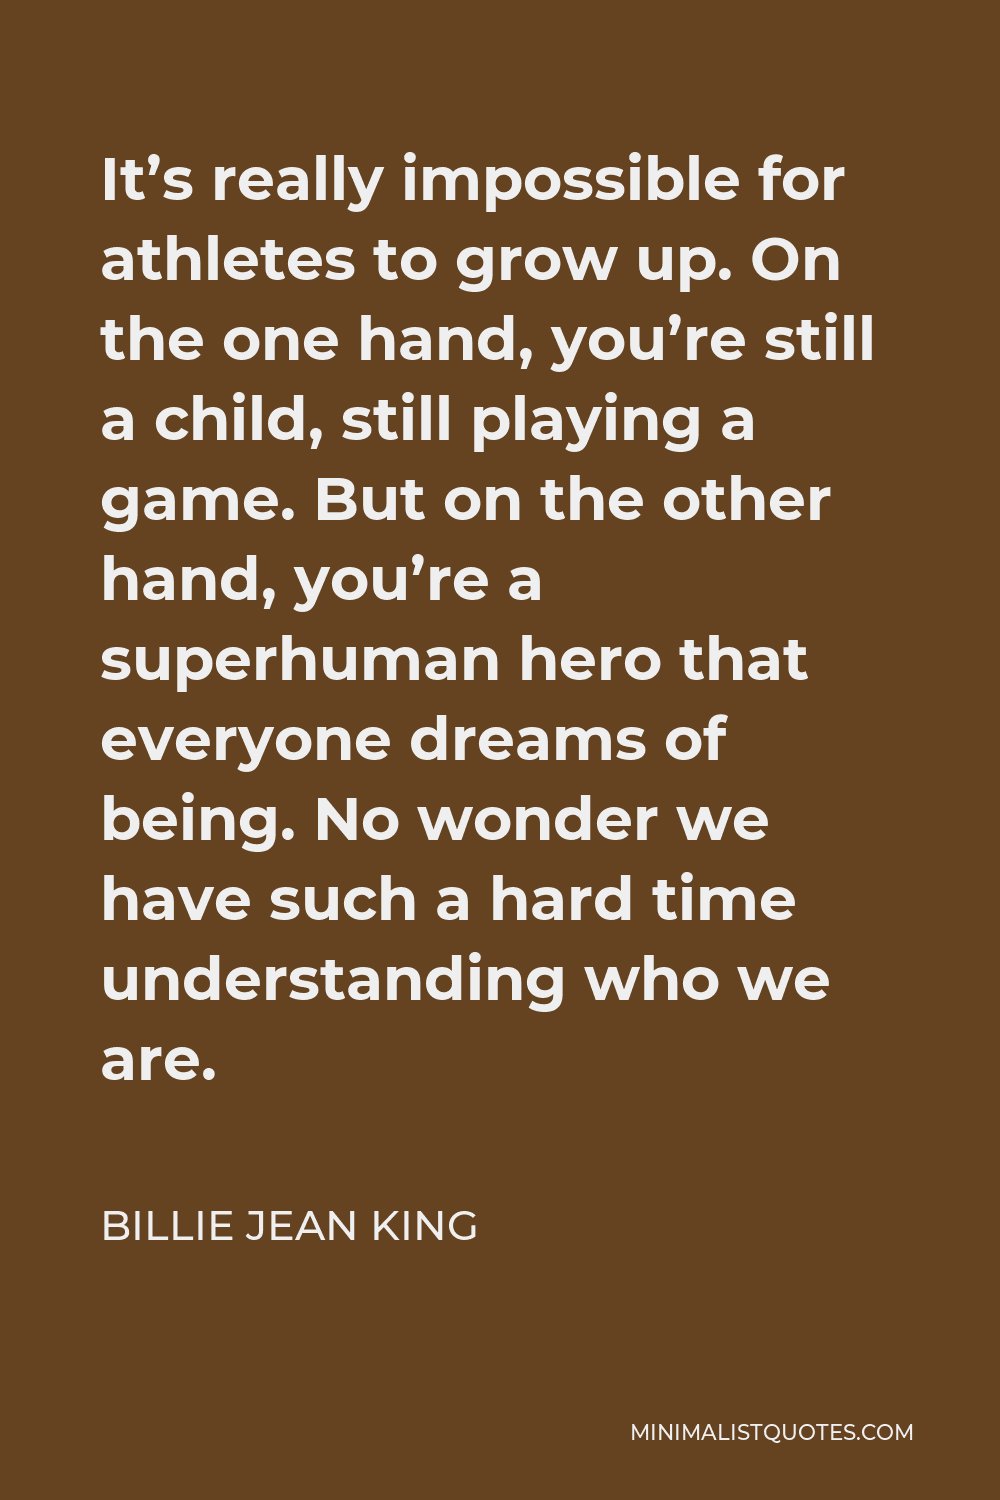 Billie Jean King Quote - It’s really impossible for athletes to grow up. On the one hand, you’re still a child, still playing a game. But on the other hand, you’re a superhuman hero that everyone dreams of being. No wonder we have such a hard time understanding who we are.